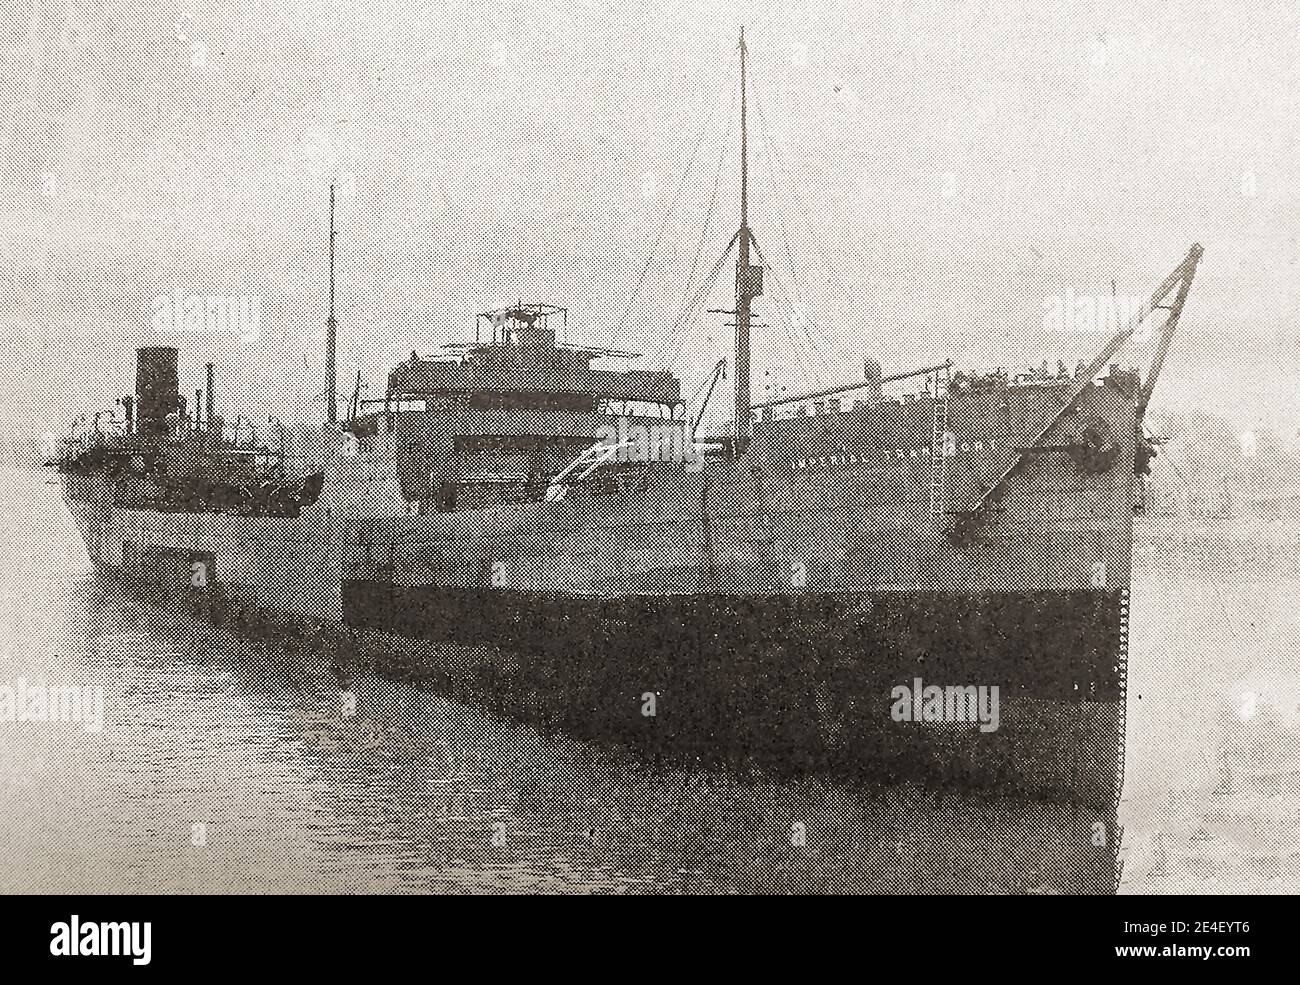 A circa 1941 photograph showing the  refurbished British oil tanker M V 'Imperial Transport' capable of carrying 12,500 tons of oil. Earlier because of the British government investment in many of the early tankers the first ships bore the prefix 'British' not 'Imperial' .  The British Tanker Company Limited (BTC)  was launched in April 1915 . With the outbreak of WWII, the British government chartered BTC's whole fleet of 93 vessels to transport fuel ( crude and refined oil products including  fuel oil, benzine and kerosine) to for its armed forces. Stock Photo